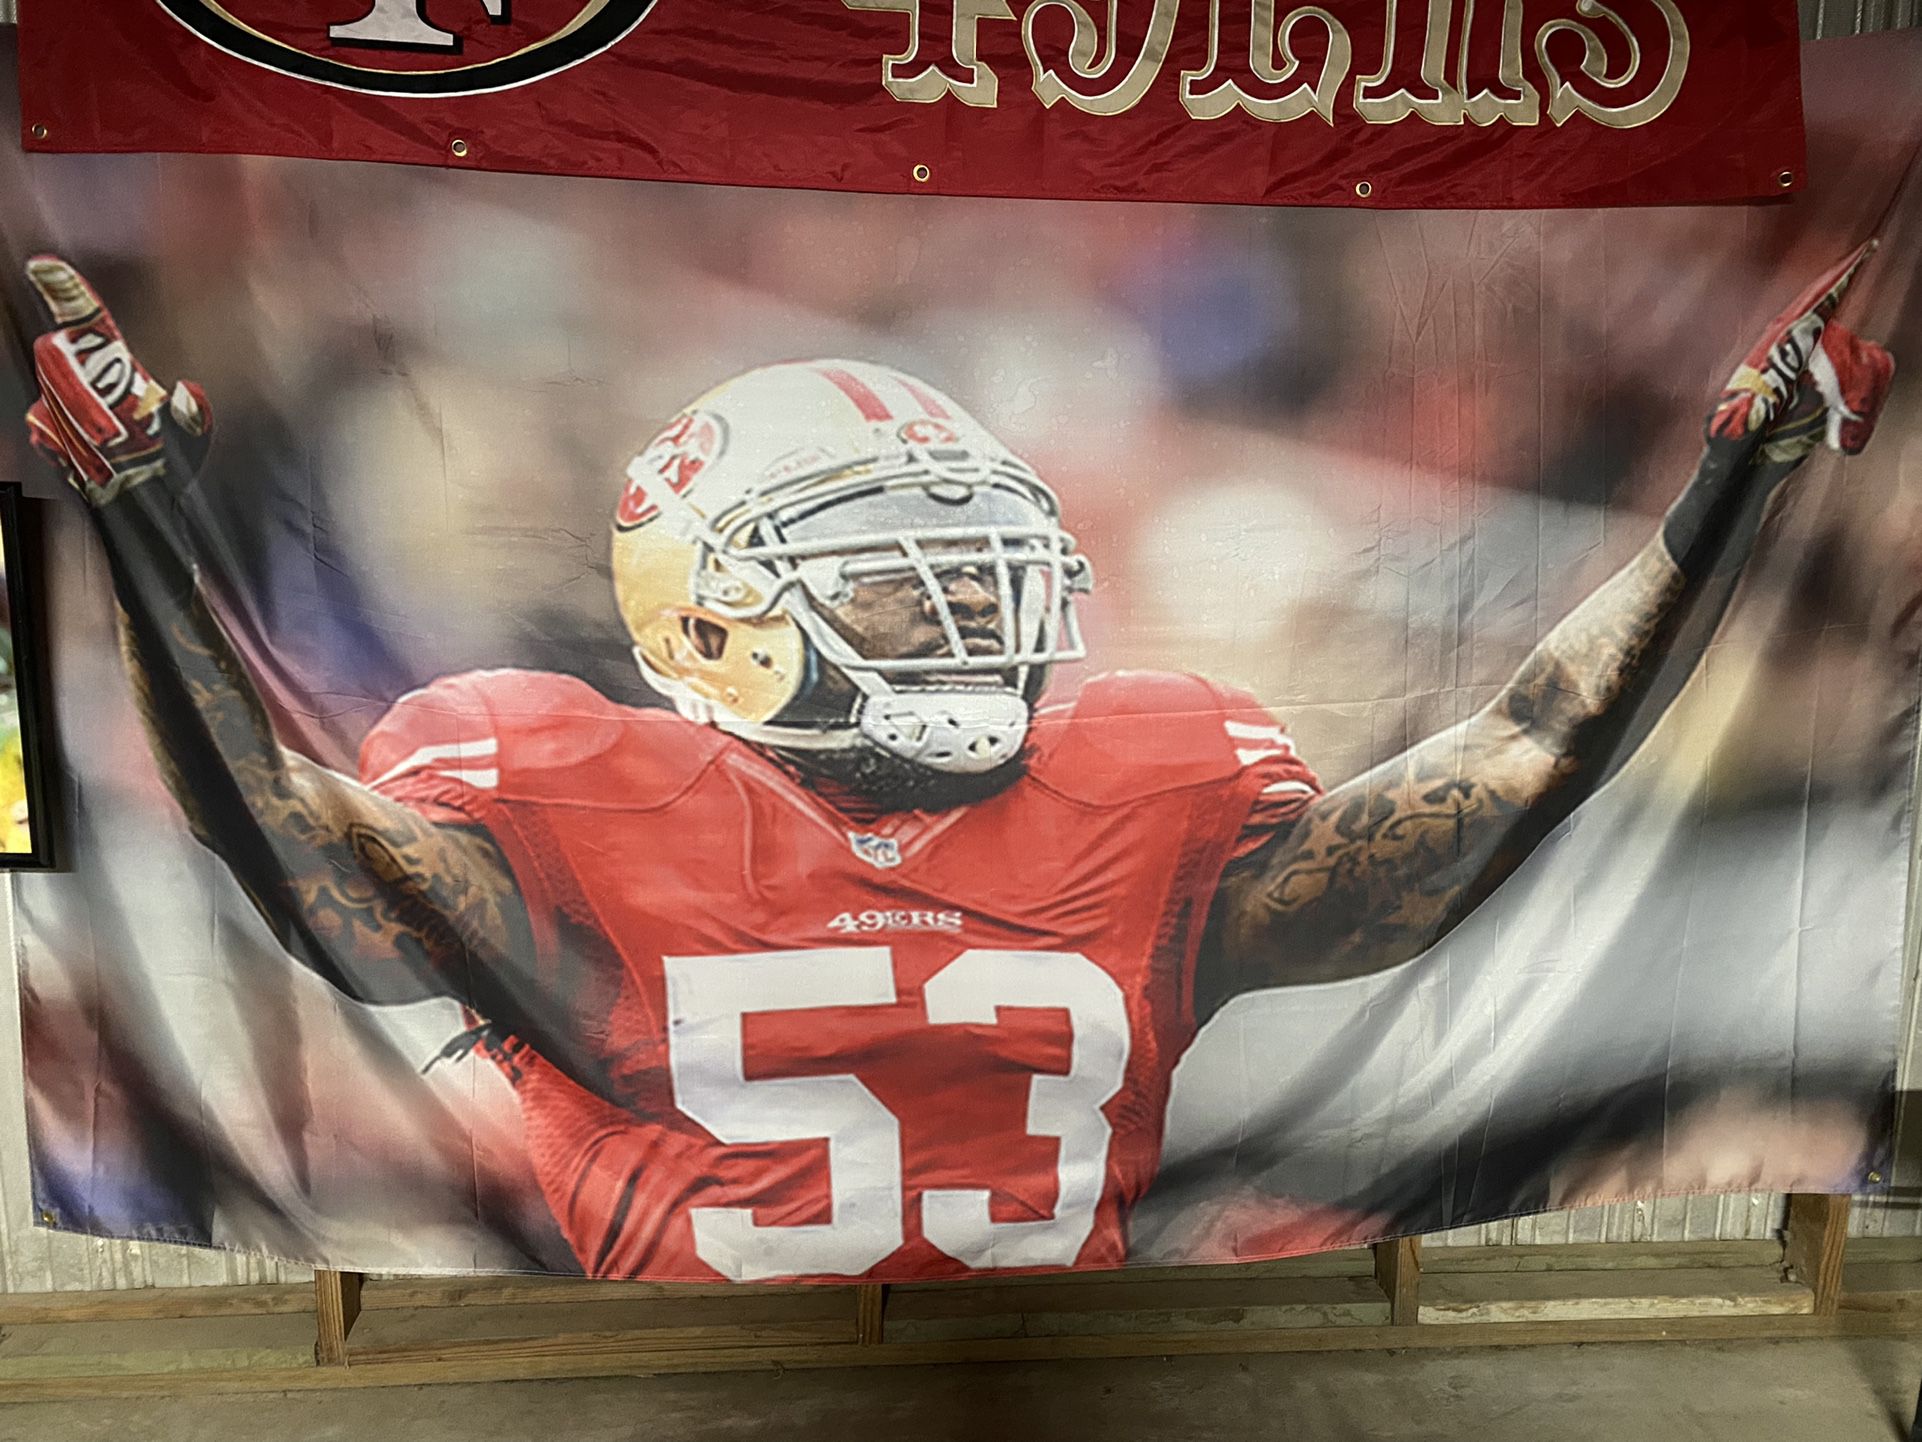 49ers flags